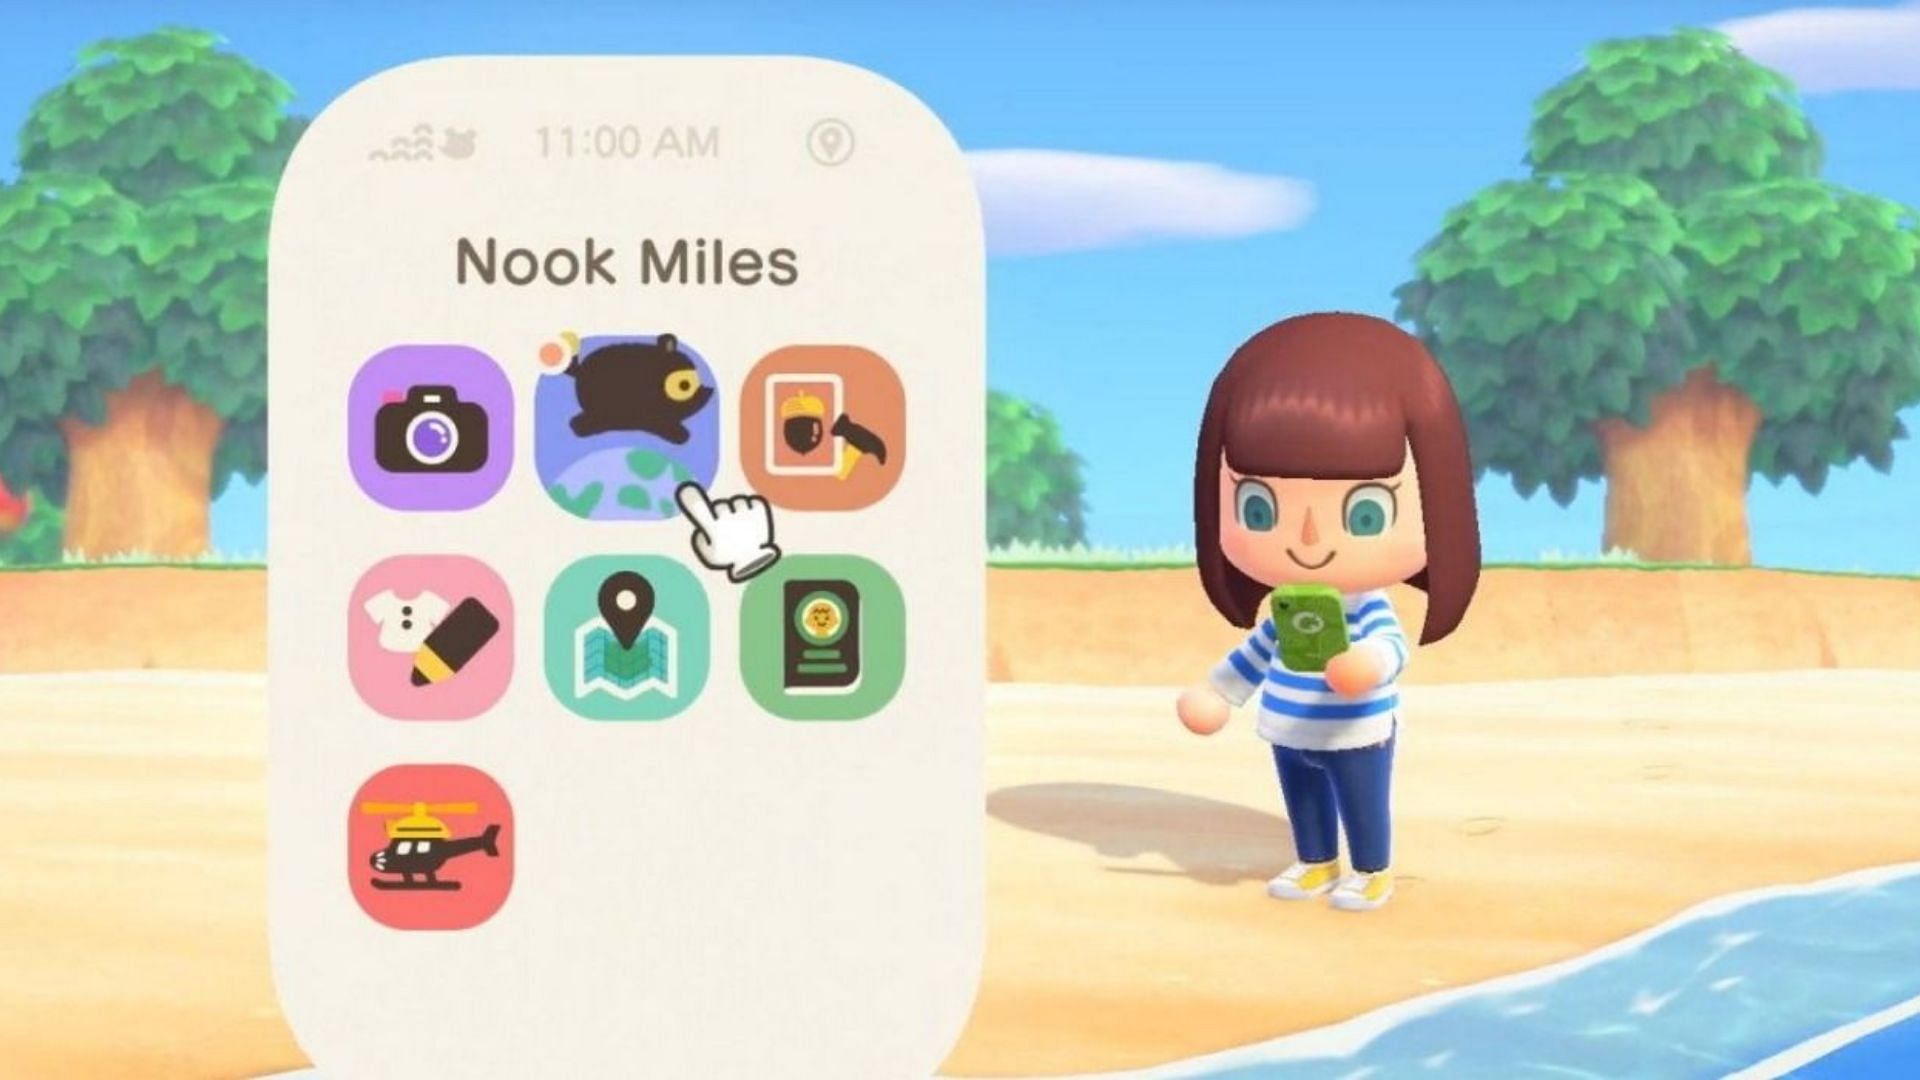 Easiest tasks players can complete to earn Nook Miles in Animal Crossing: New Horizons (Image via Nintendo)